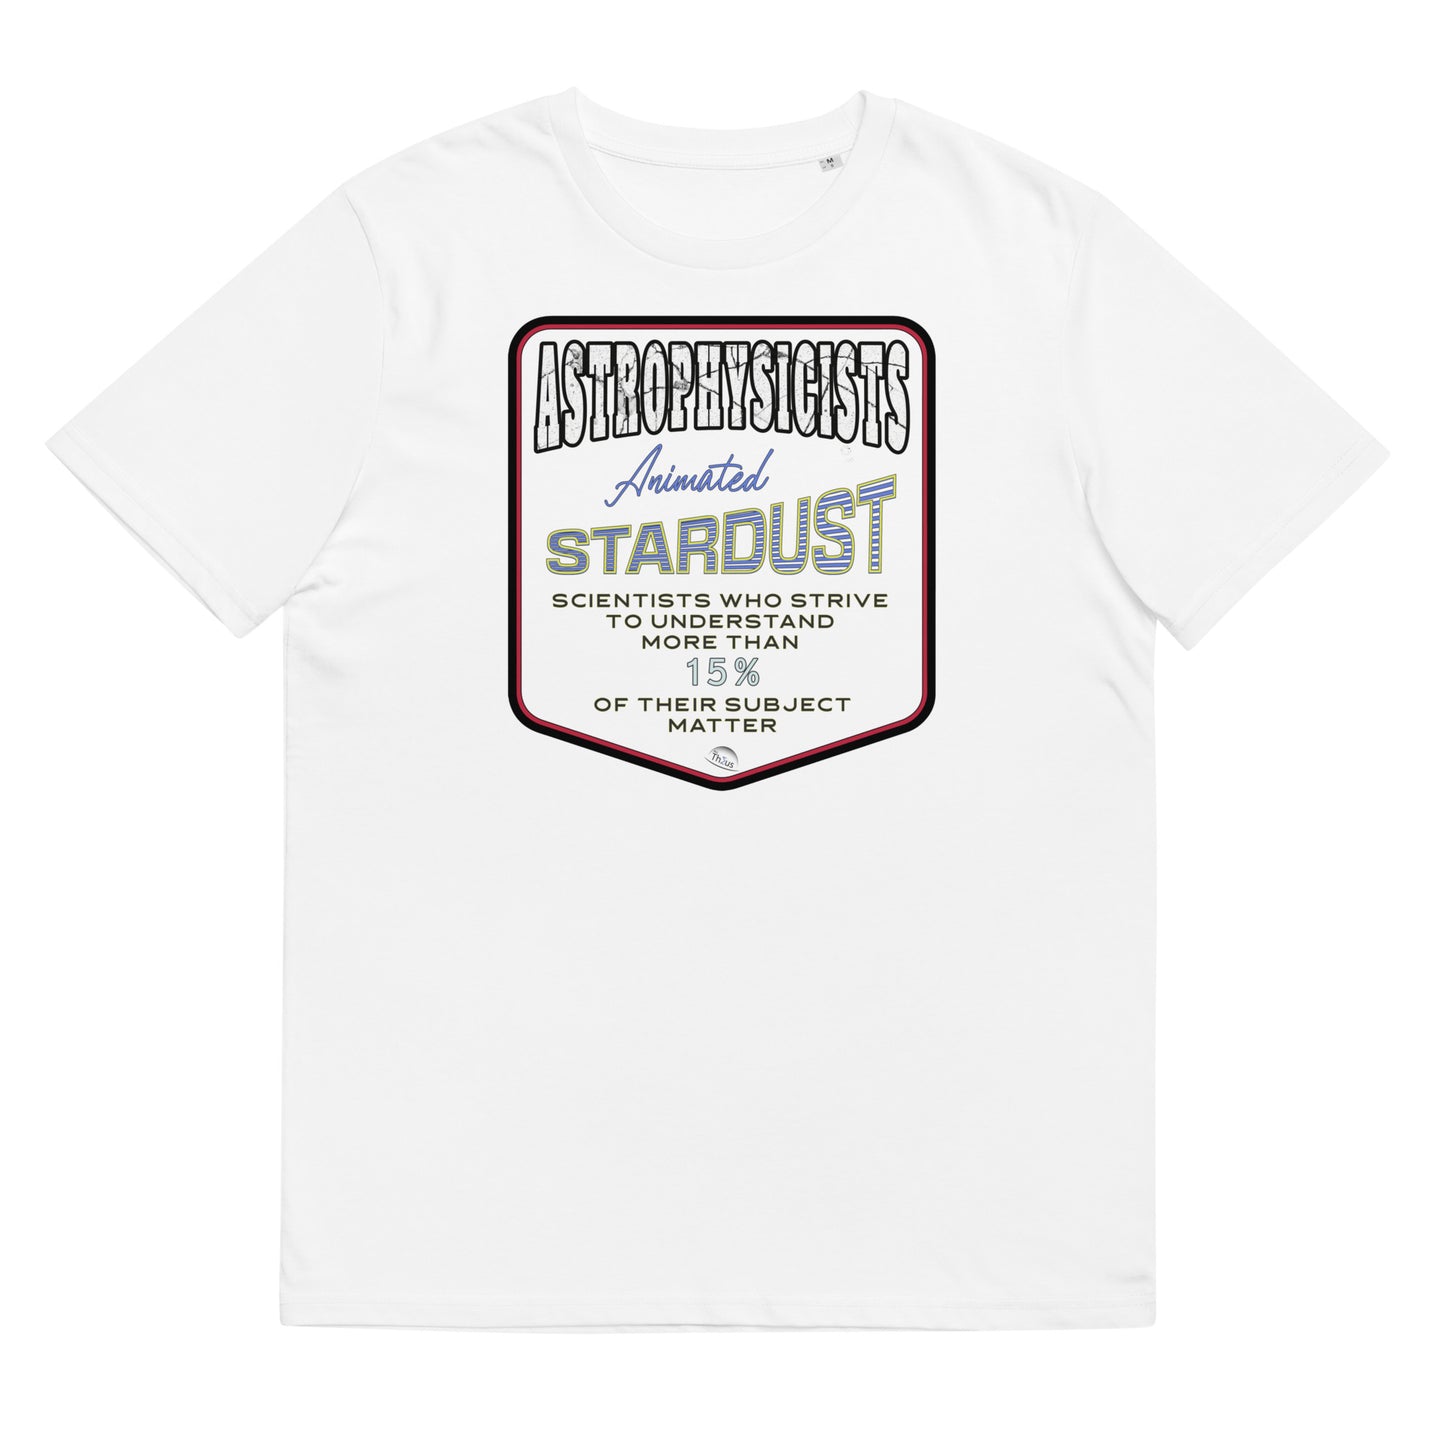 Unisex organic cotton t-shirt Astrophysicists Animated Stardust Scientists Striving To Understand > 15% of Their Subject Matter